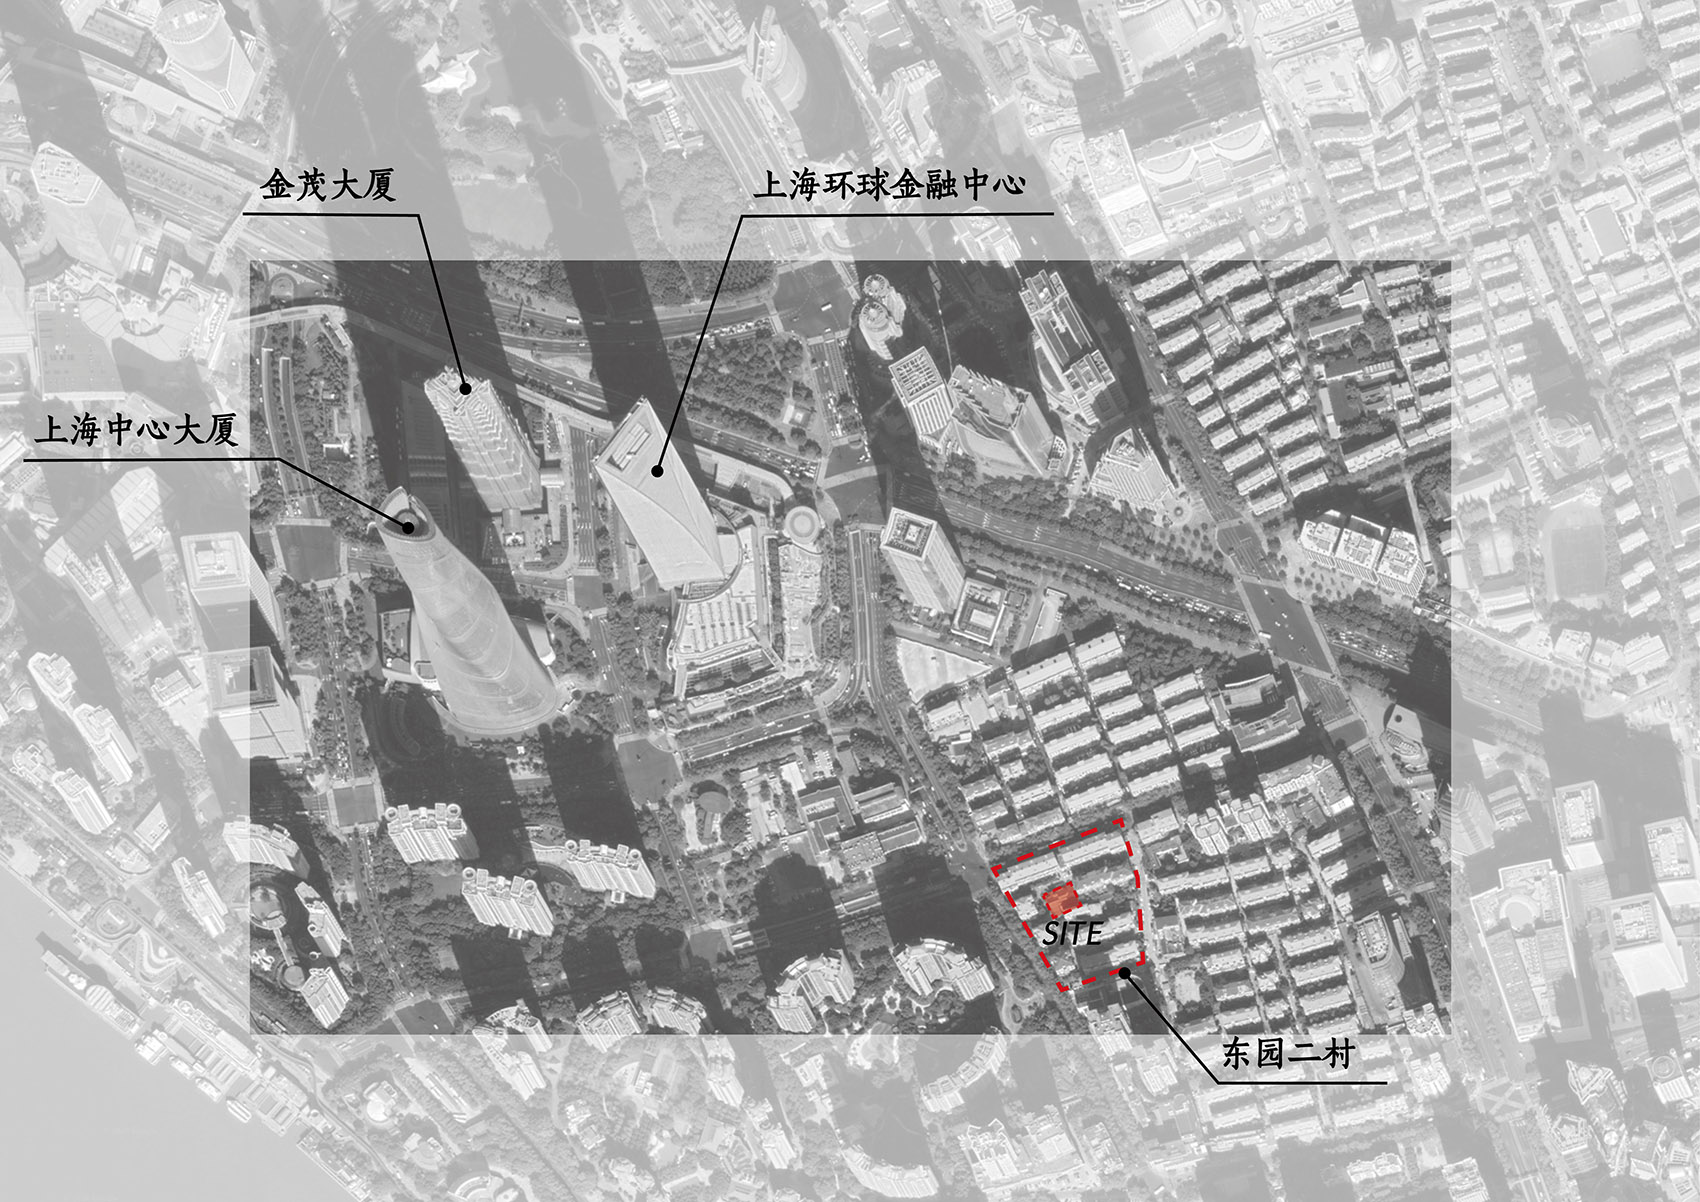 024-dongyuan-neighborhood-committee-renovation-china-by-atelier-vision.jpg